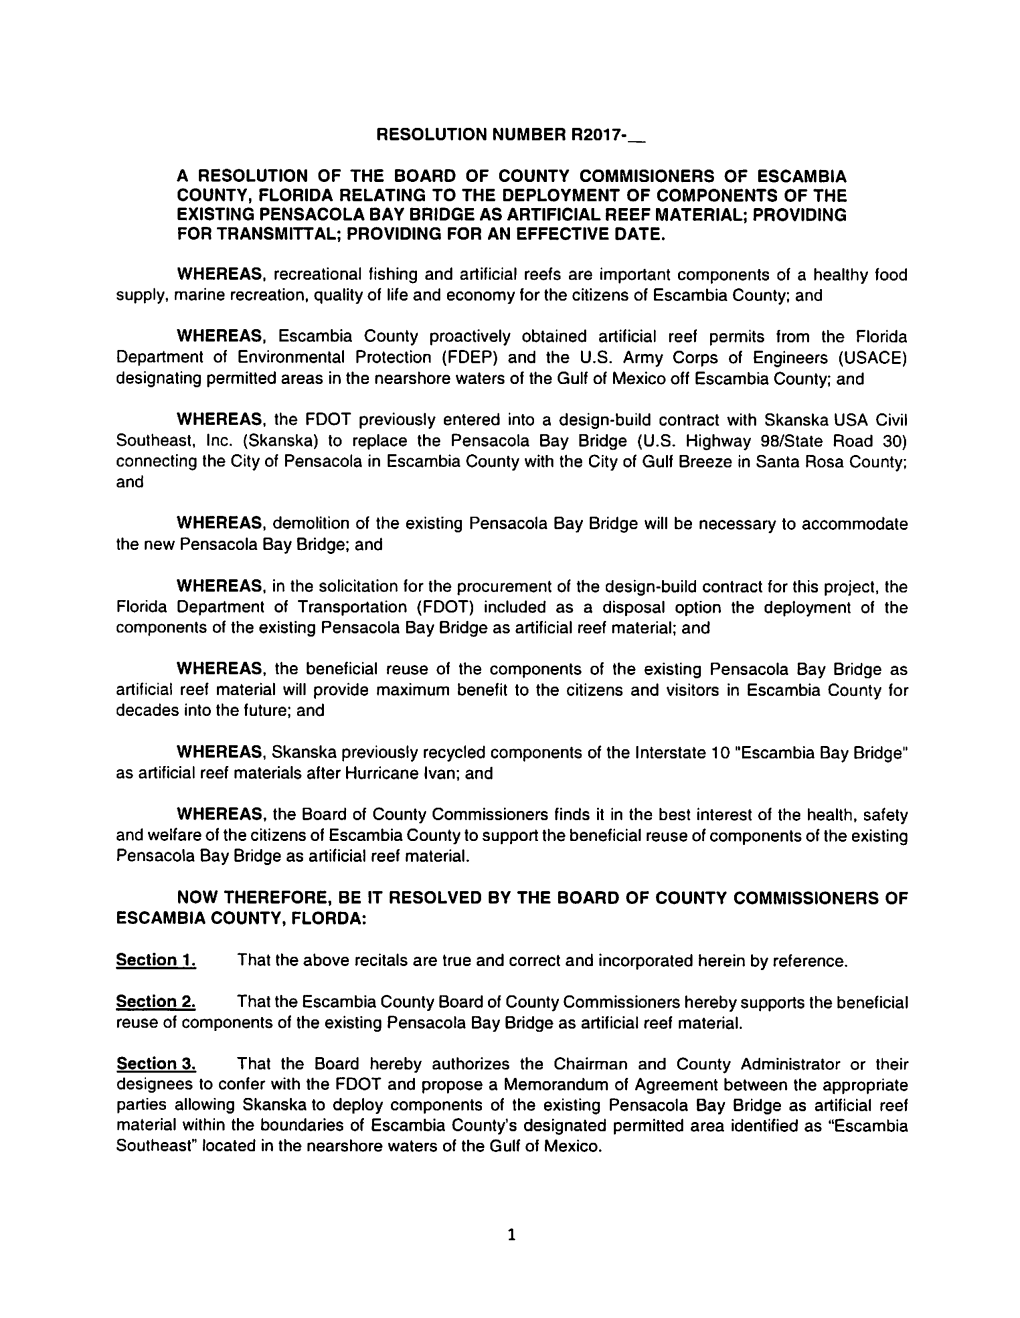 A Resolution of the Board of County Commisioners Of